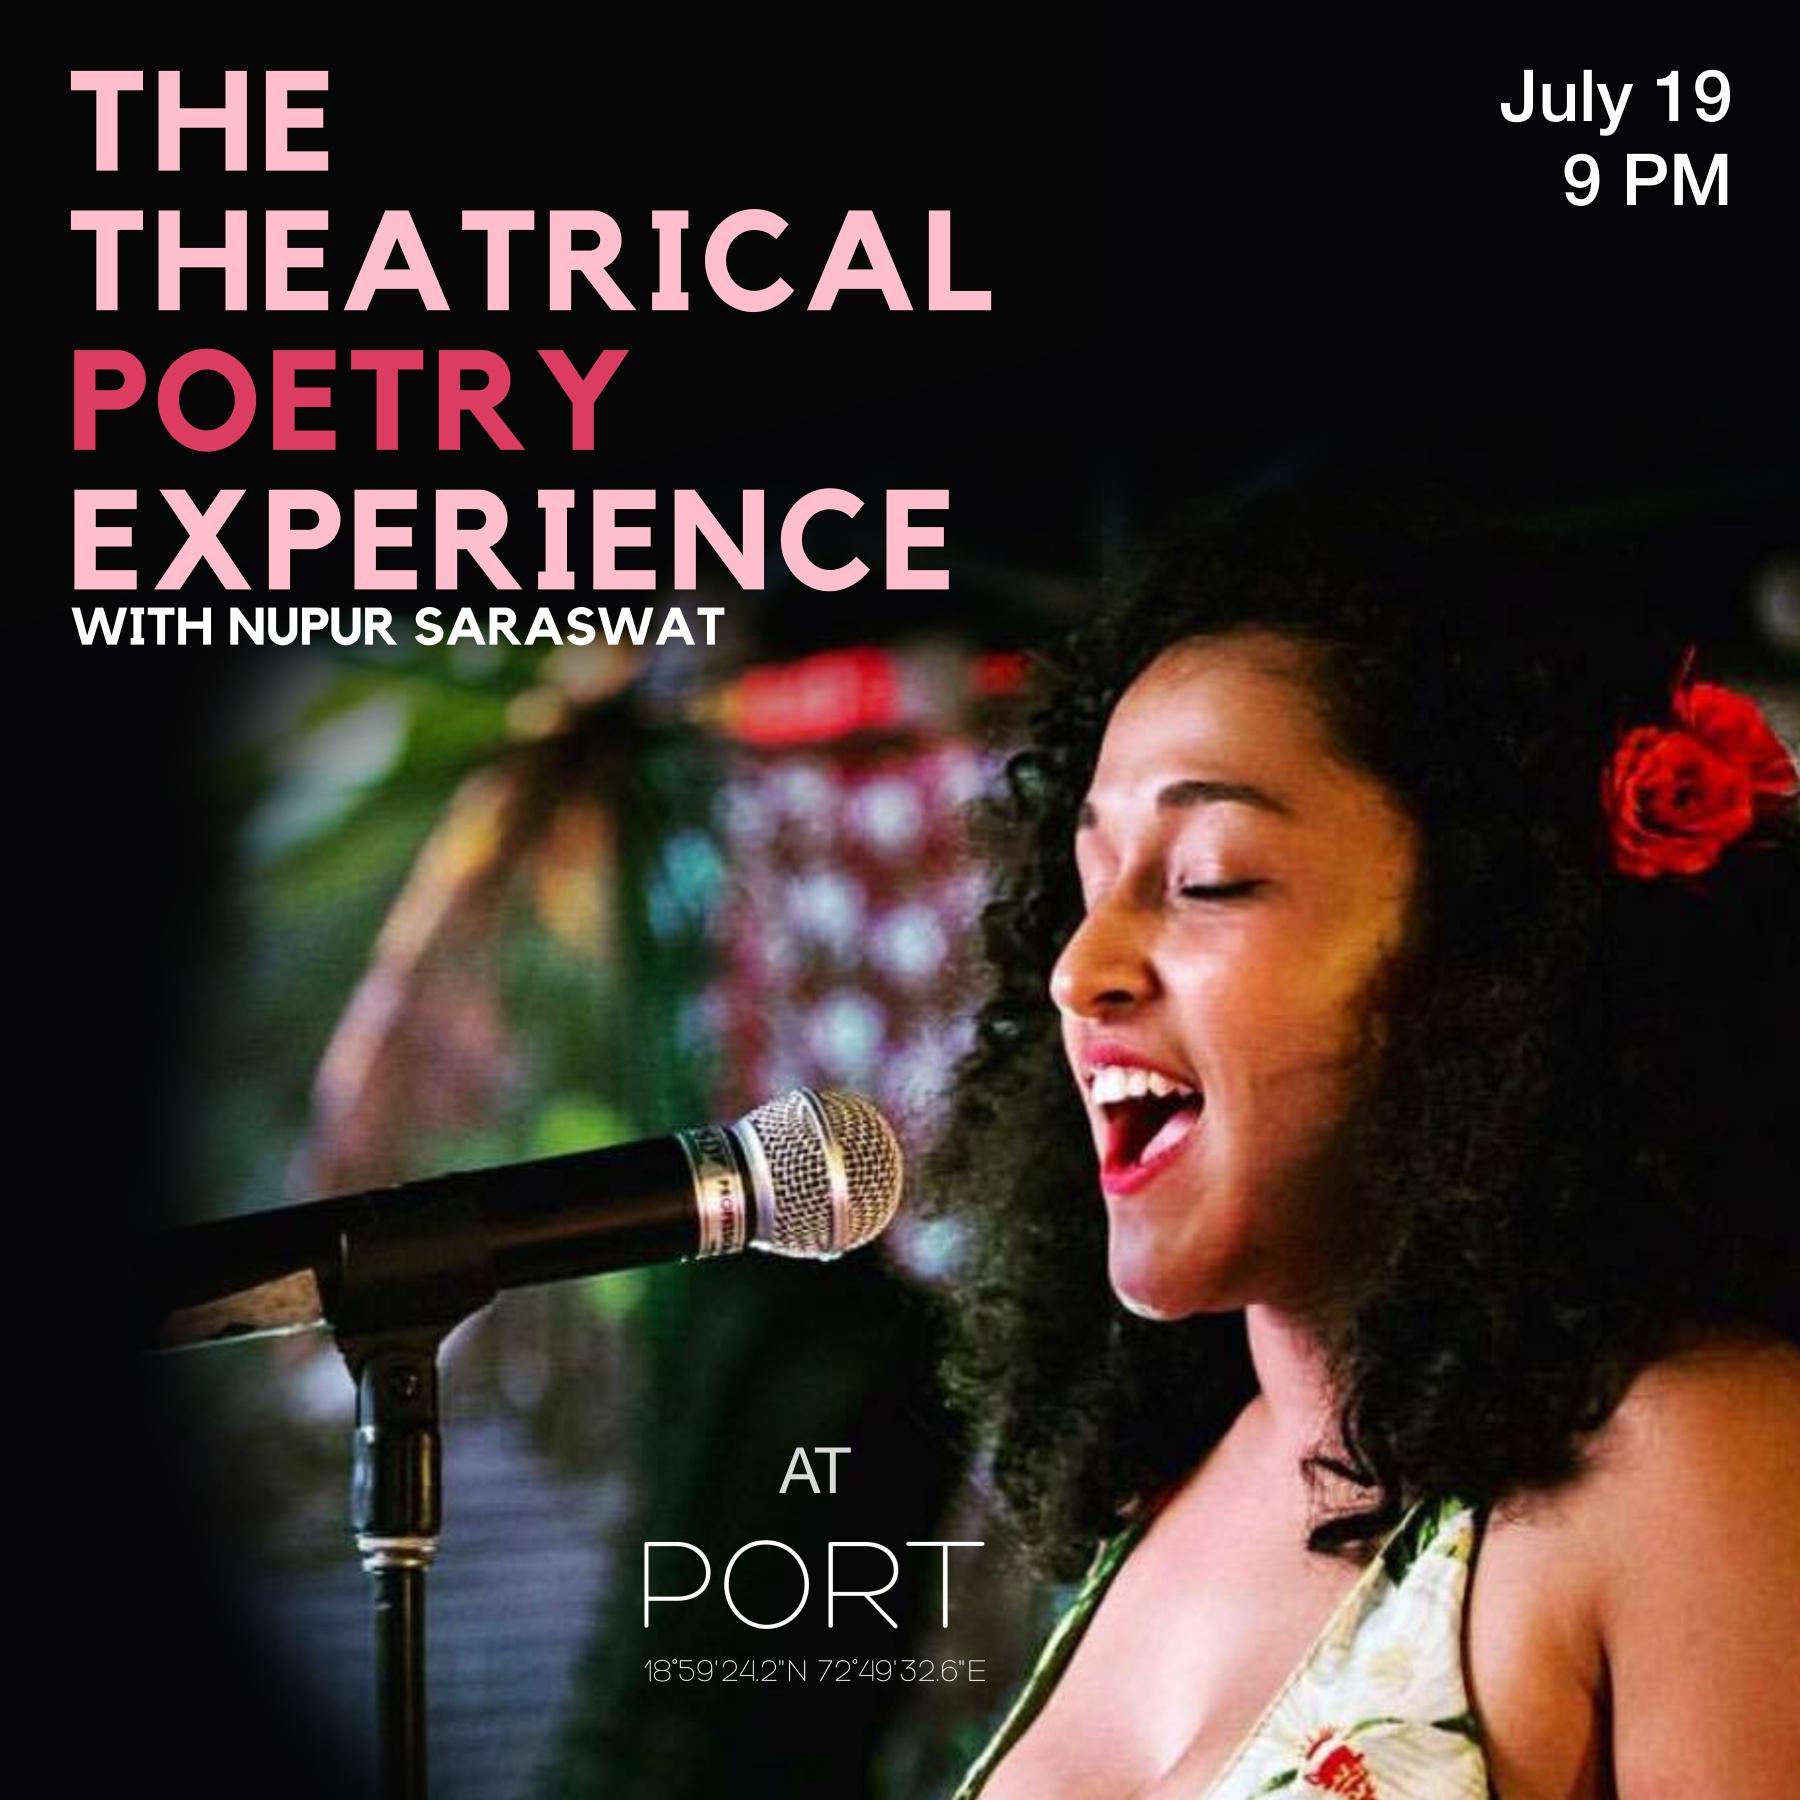 The Theatrical Poetry Experience